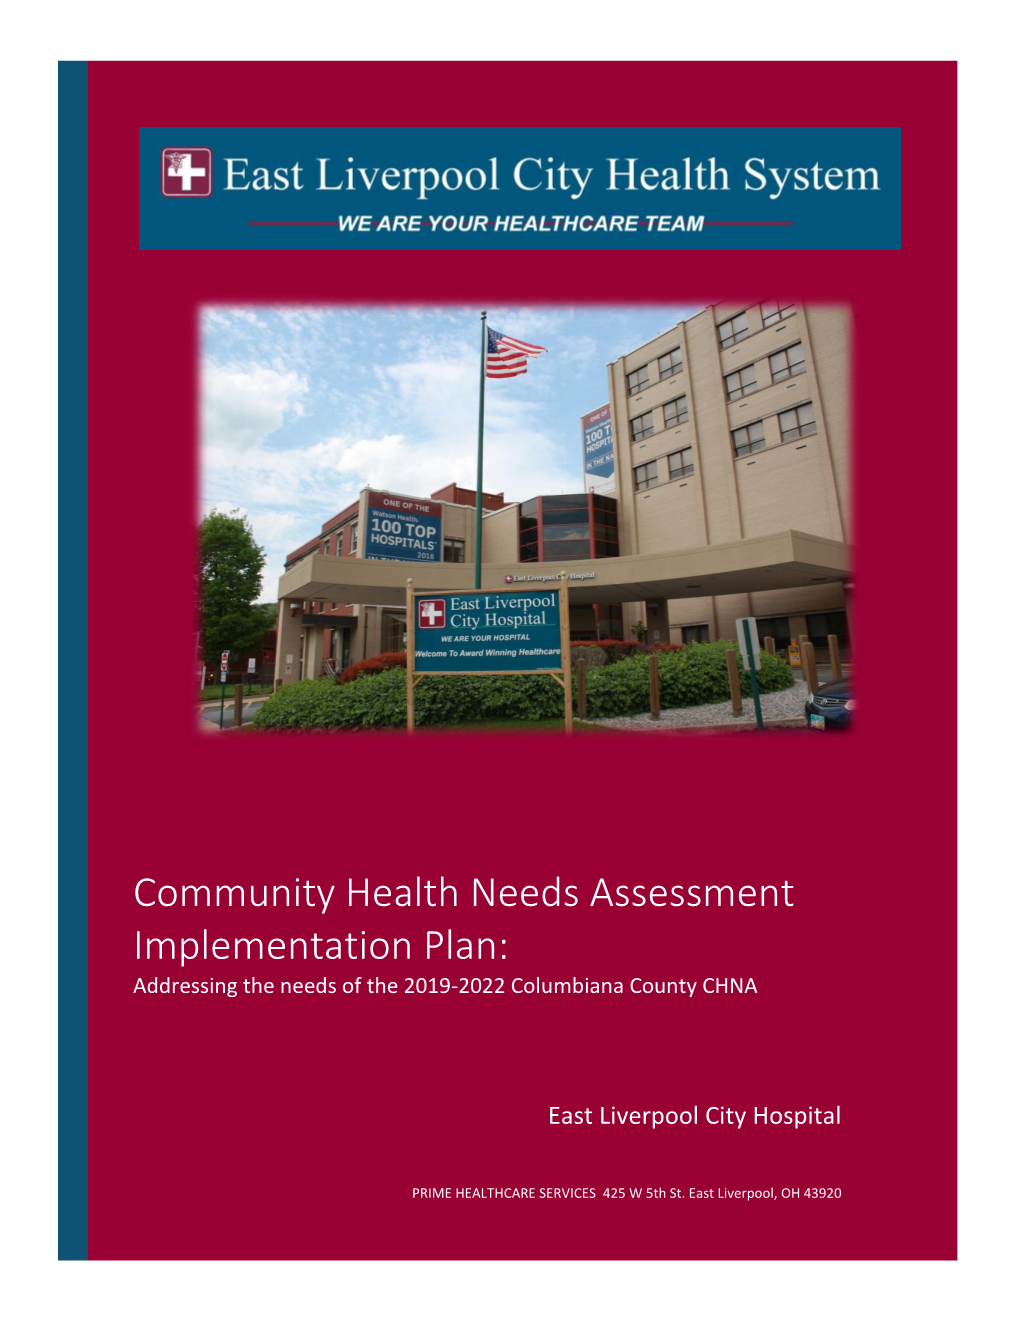 Community Health Needs Assessment Implementation Plan: Addressing the Needs of the 2019-2022 Columbiana County CHNA